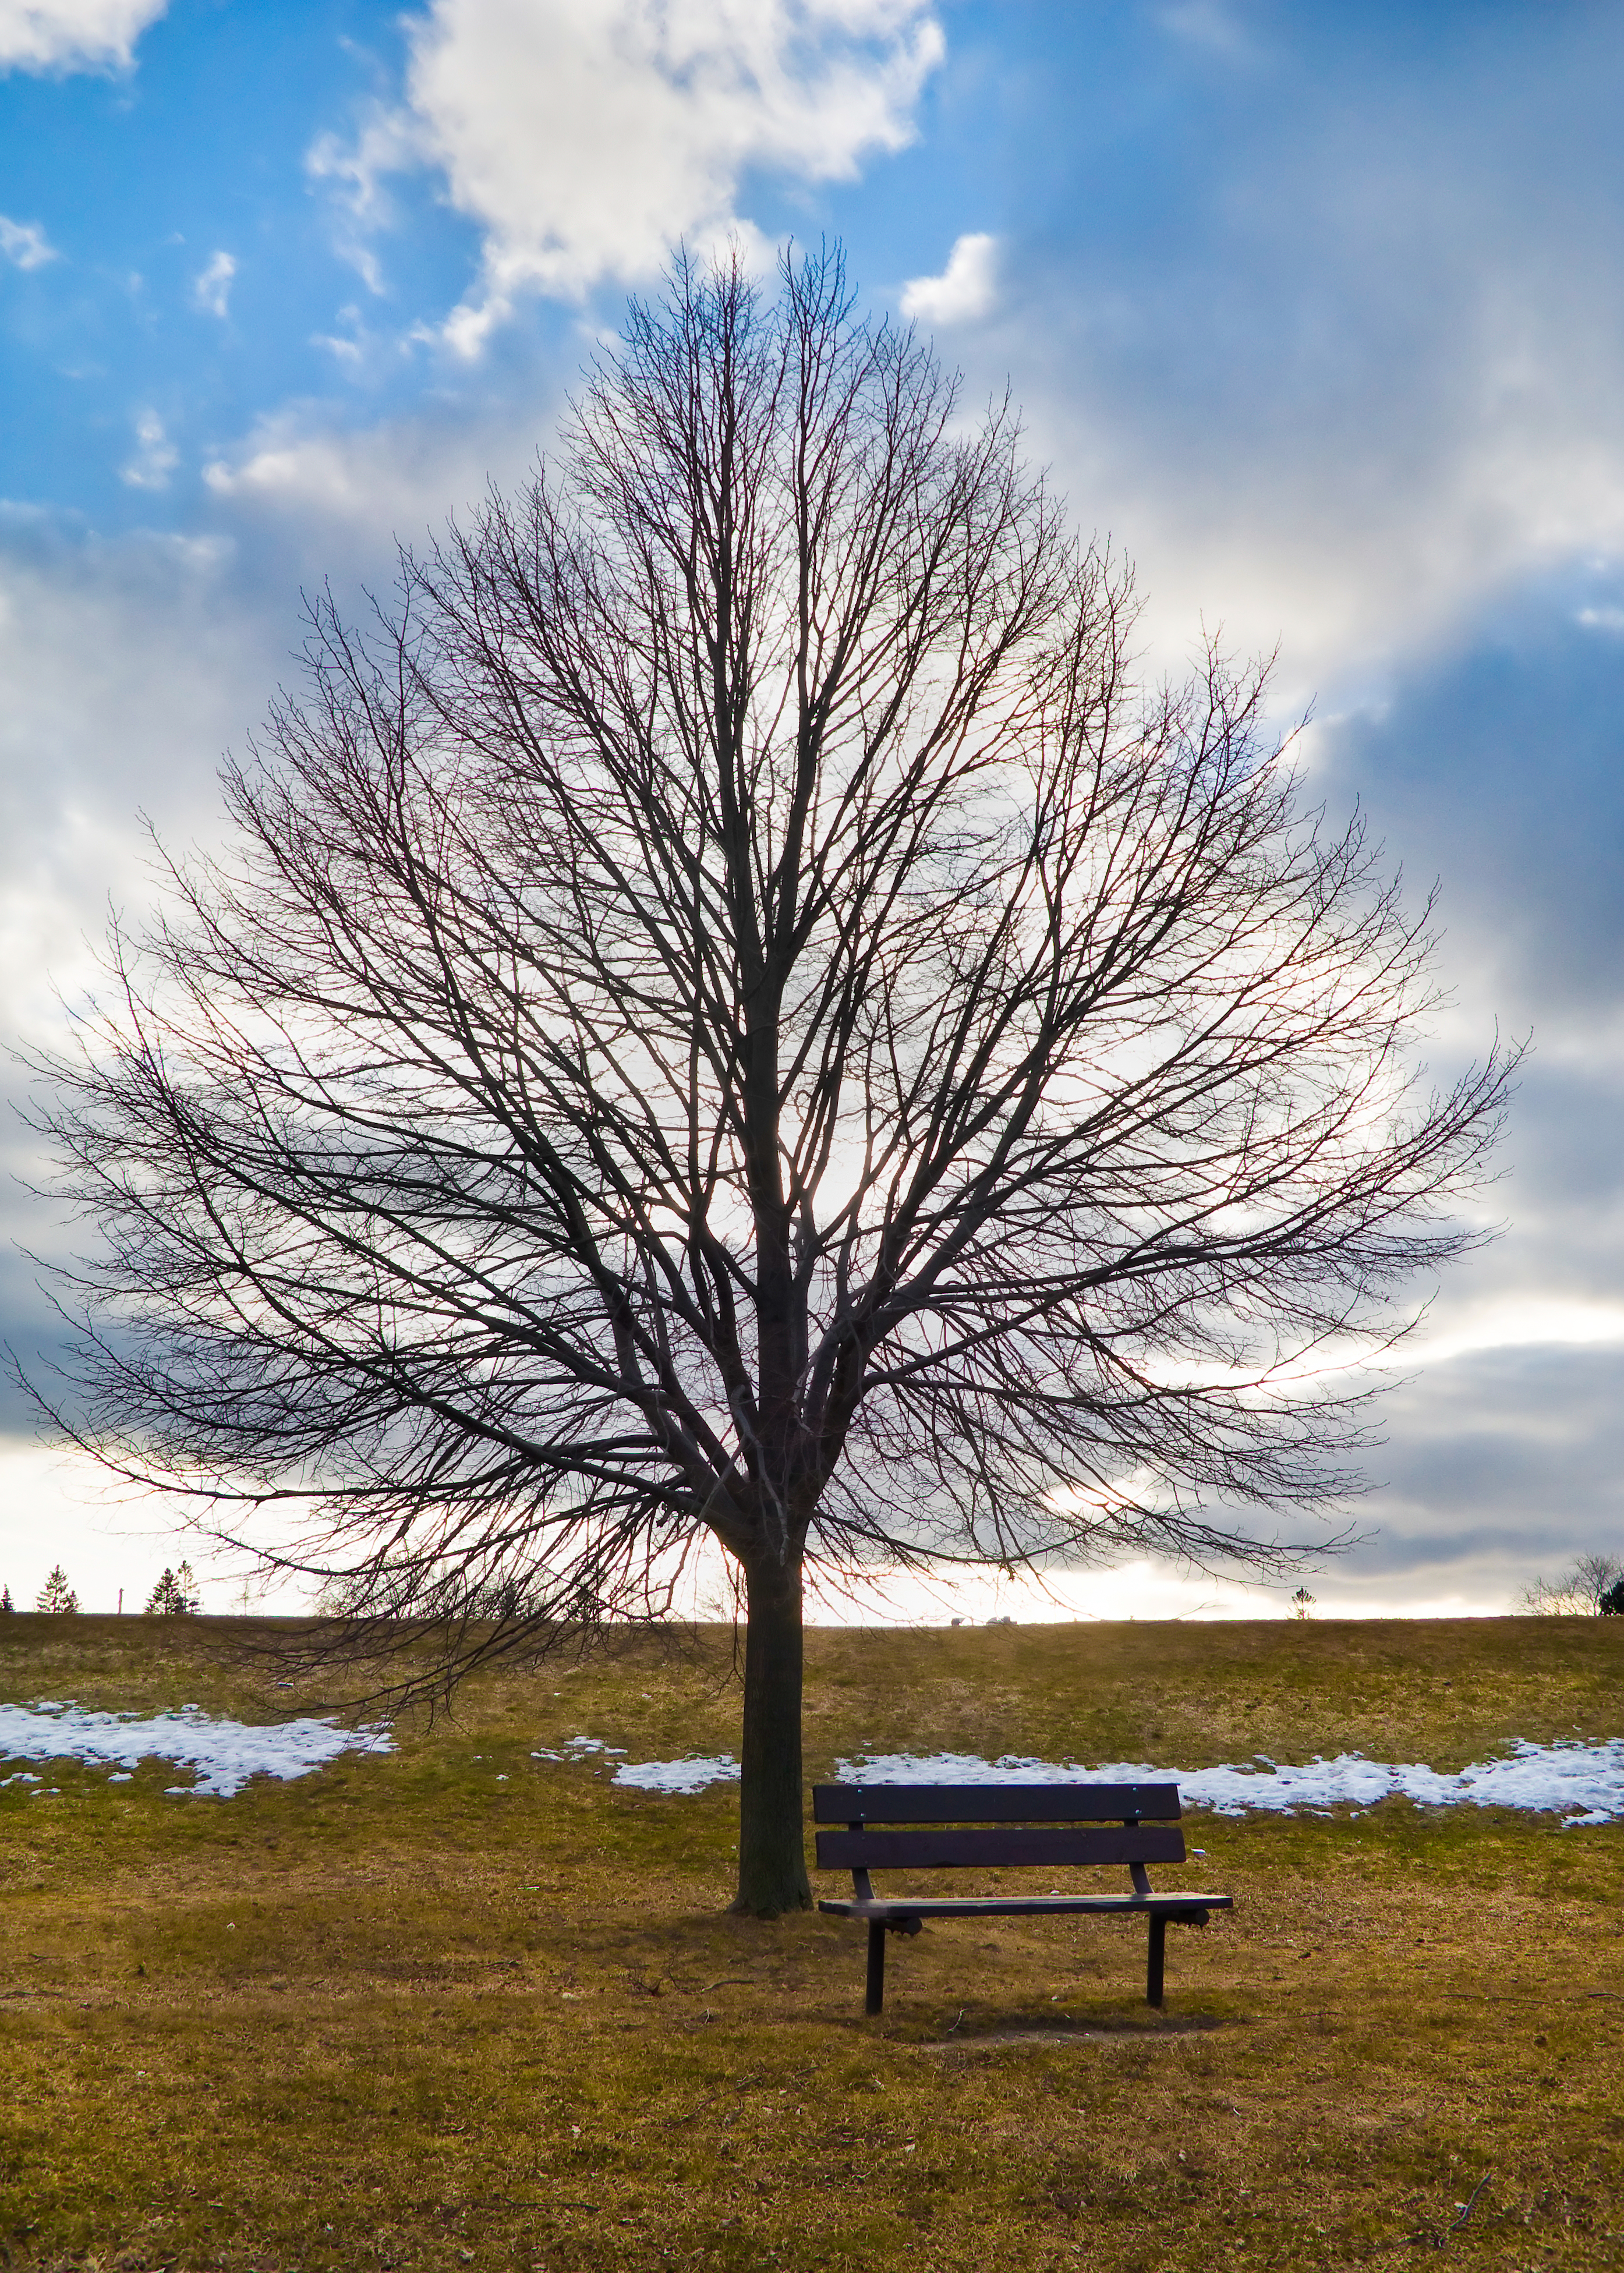 File:Tree and bench at Farquharson Park in Scarborough.jpg ...